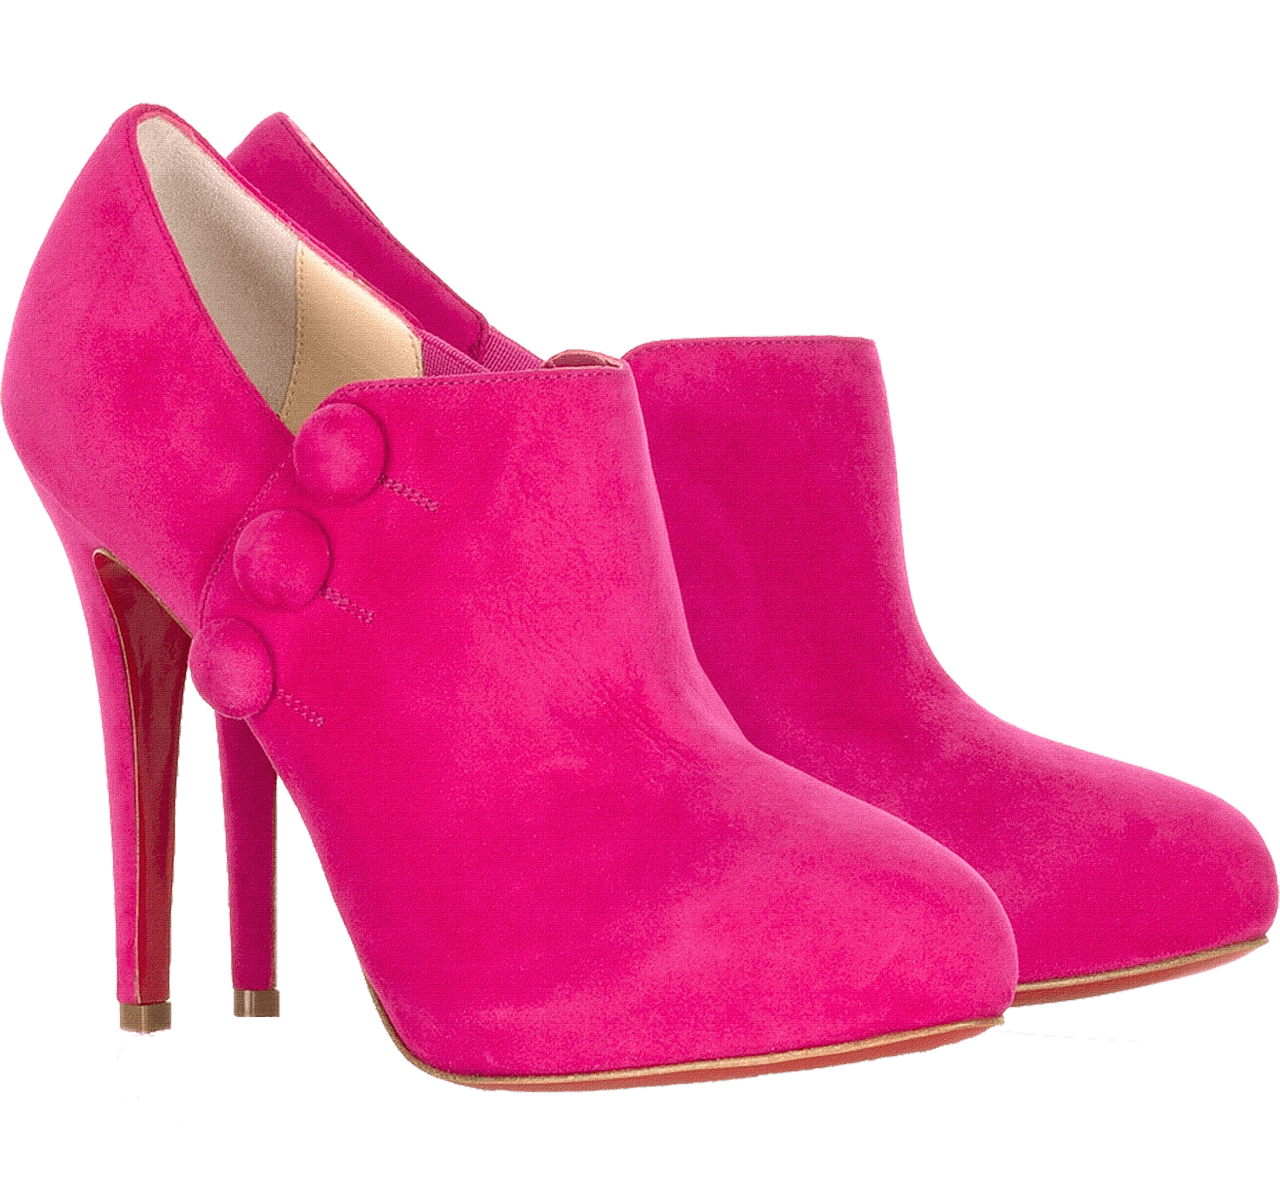 Female Shoes Image PNG Image